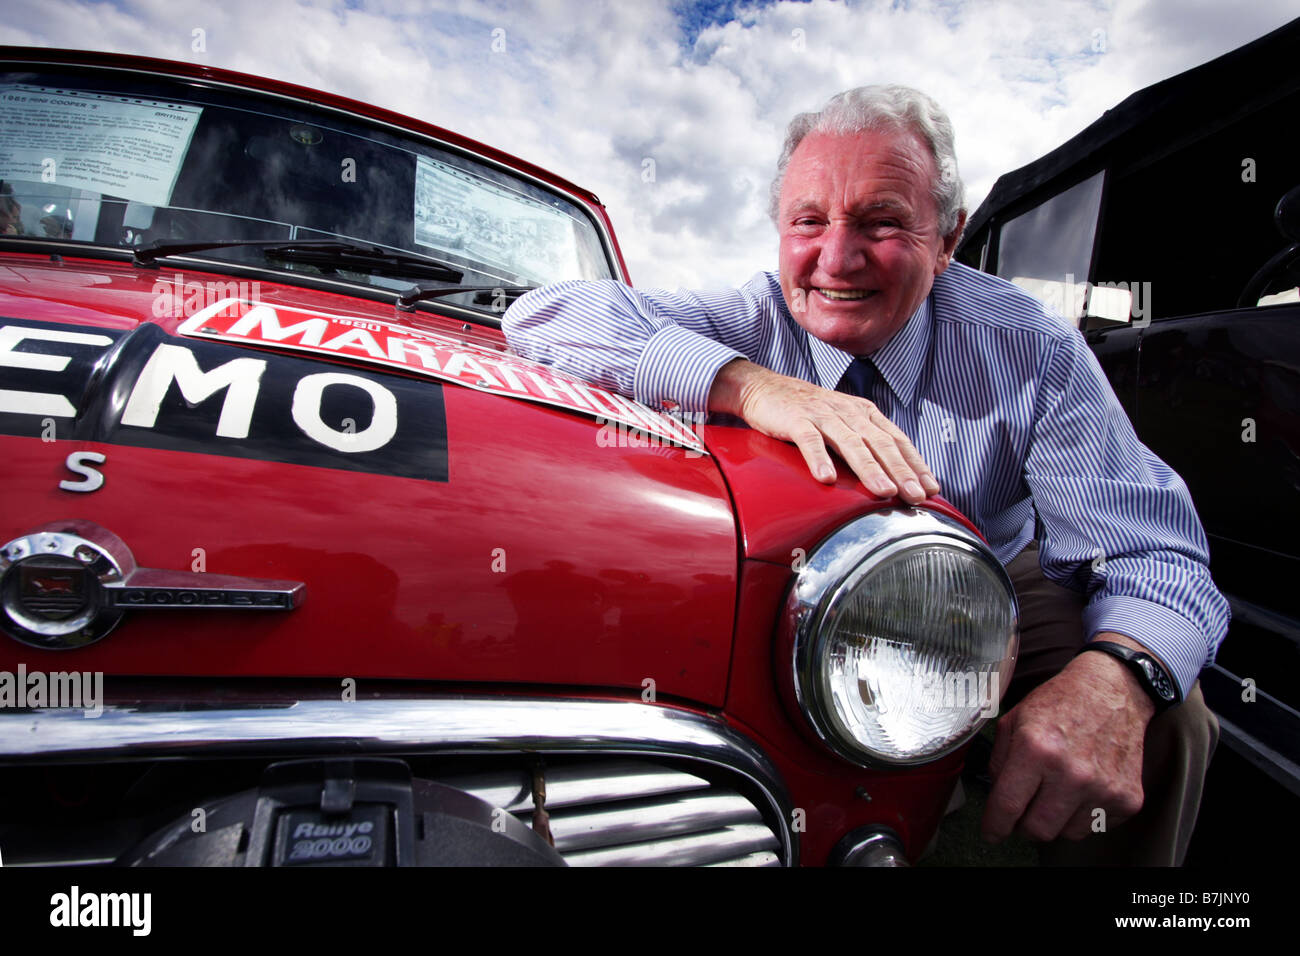 1964 Monte Carlo Rally Winner Paddy Hopkirk with his 1965 Mini Cooper S at the Cowley Classic Car Show in Oxford 2008 Stock Photo